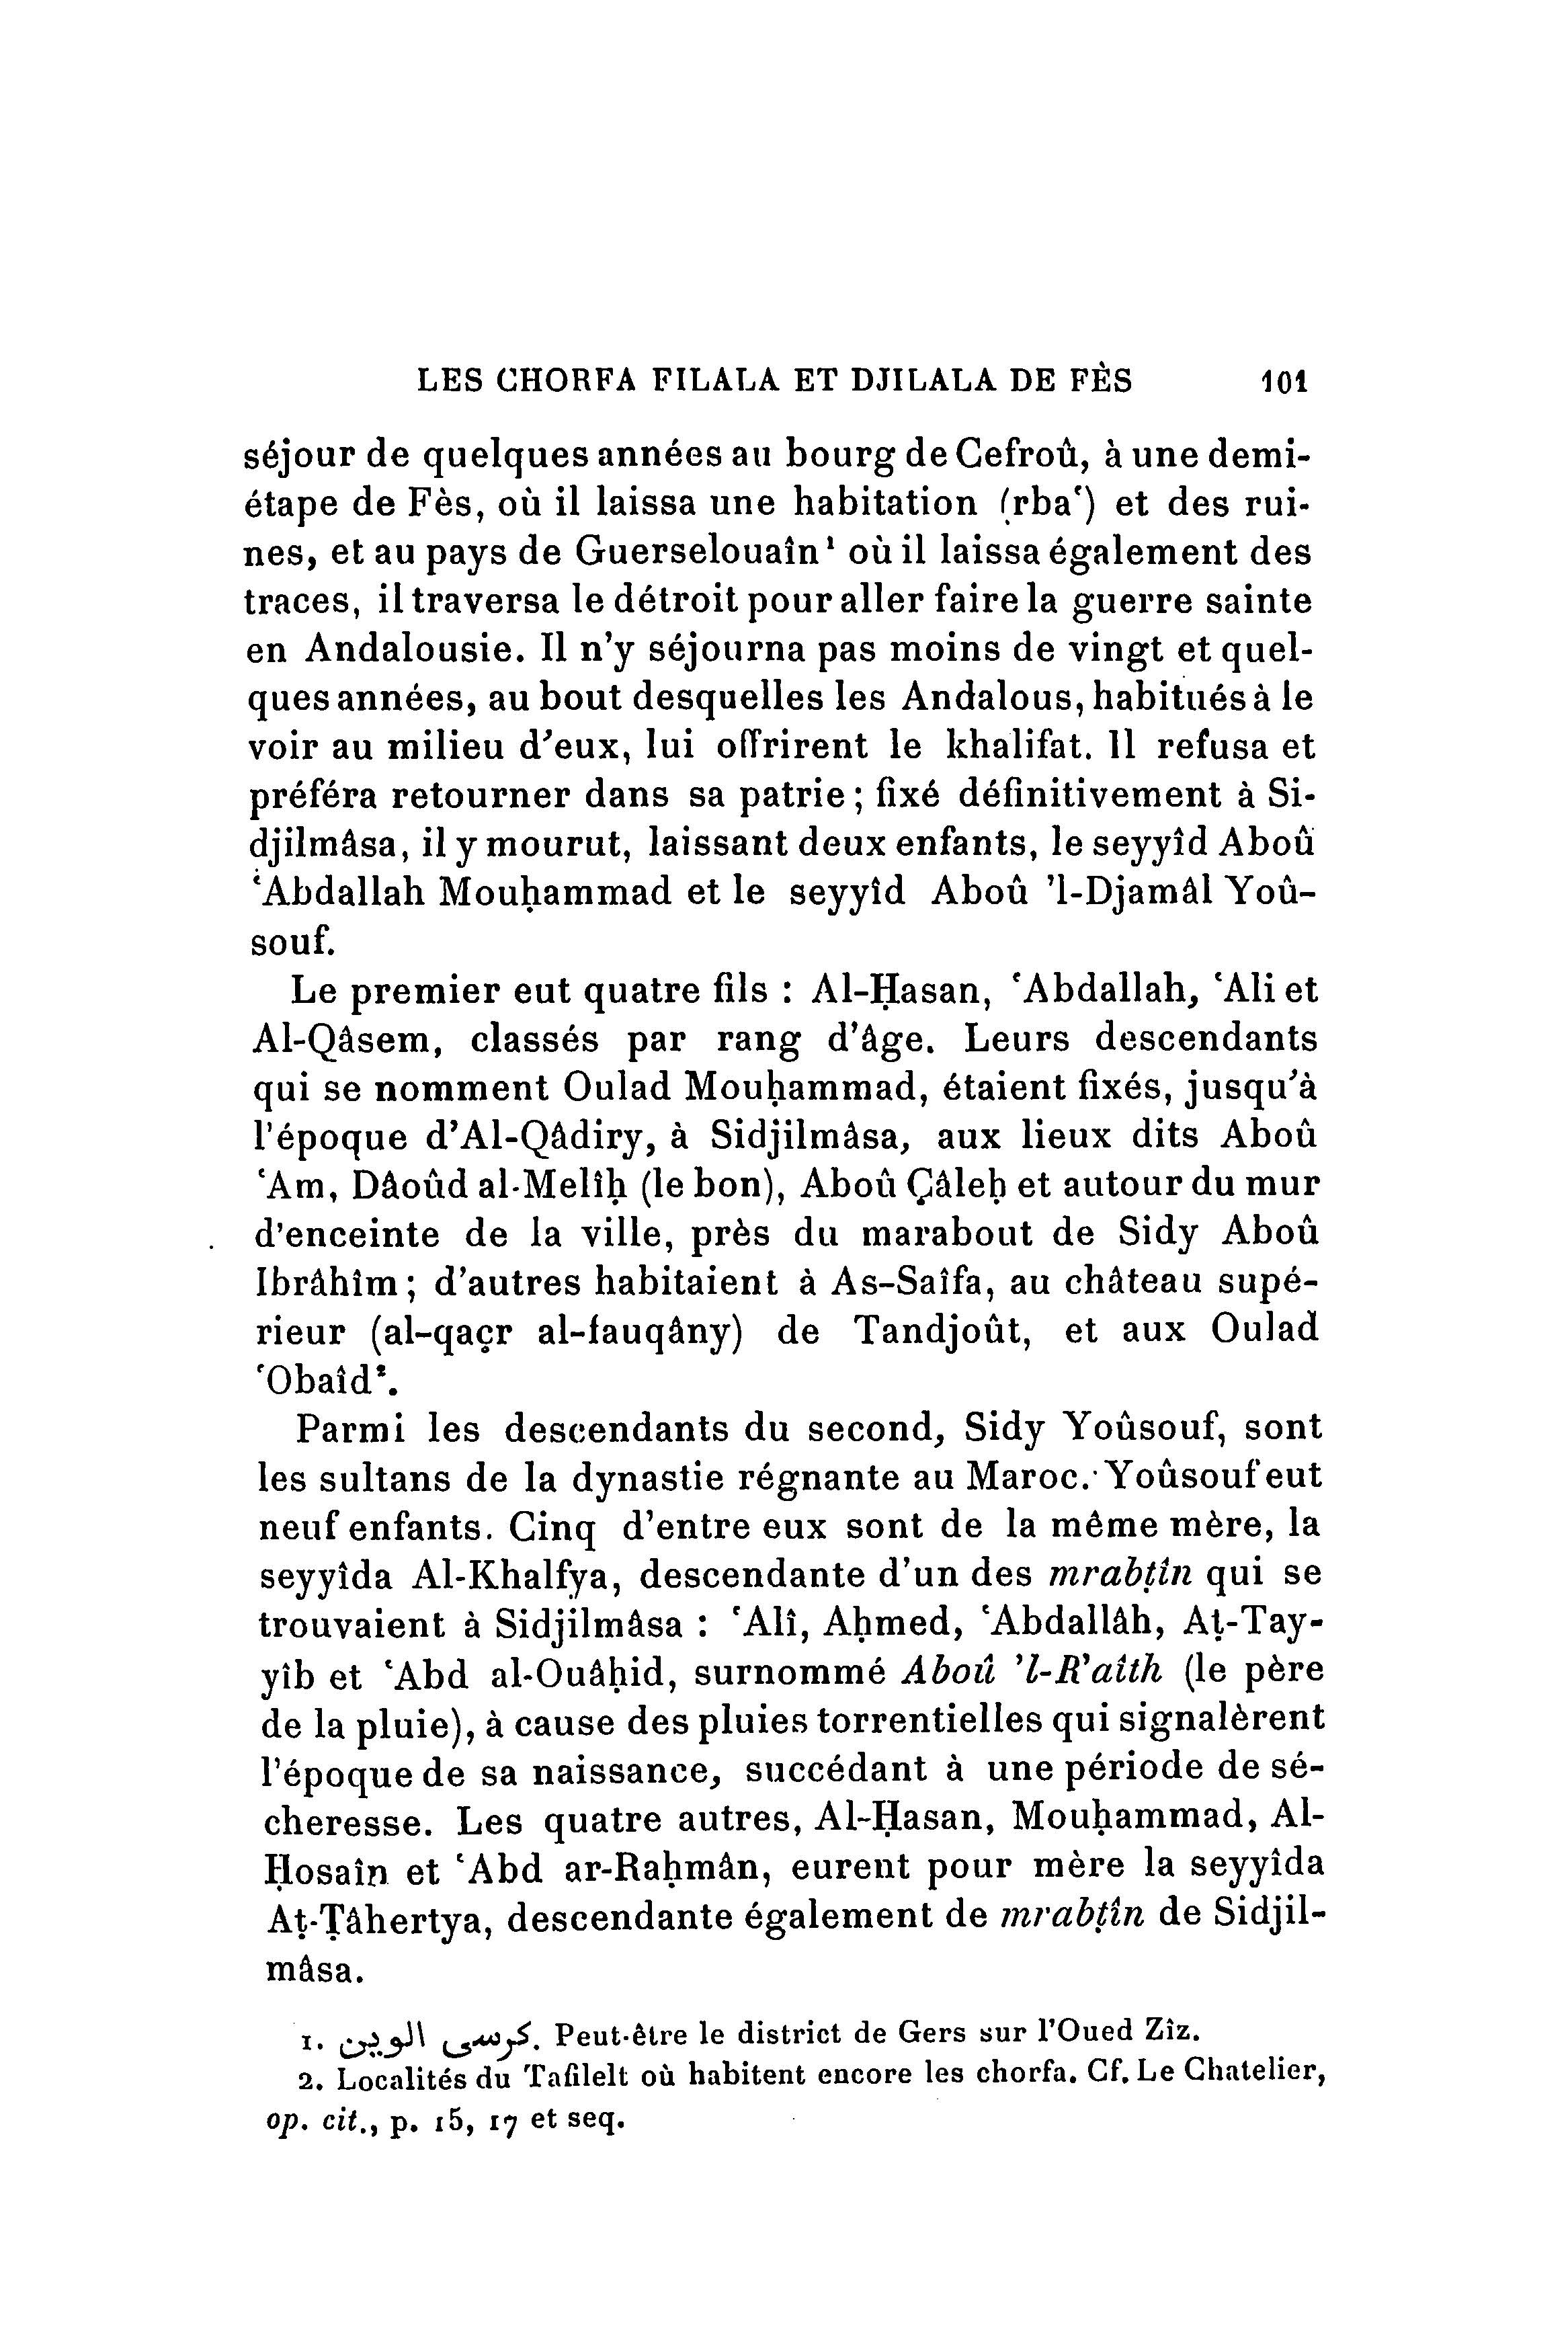 archives-marocaines-volume-03-1905_page_108